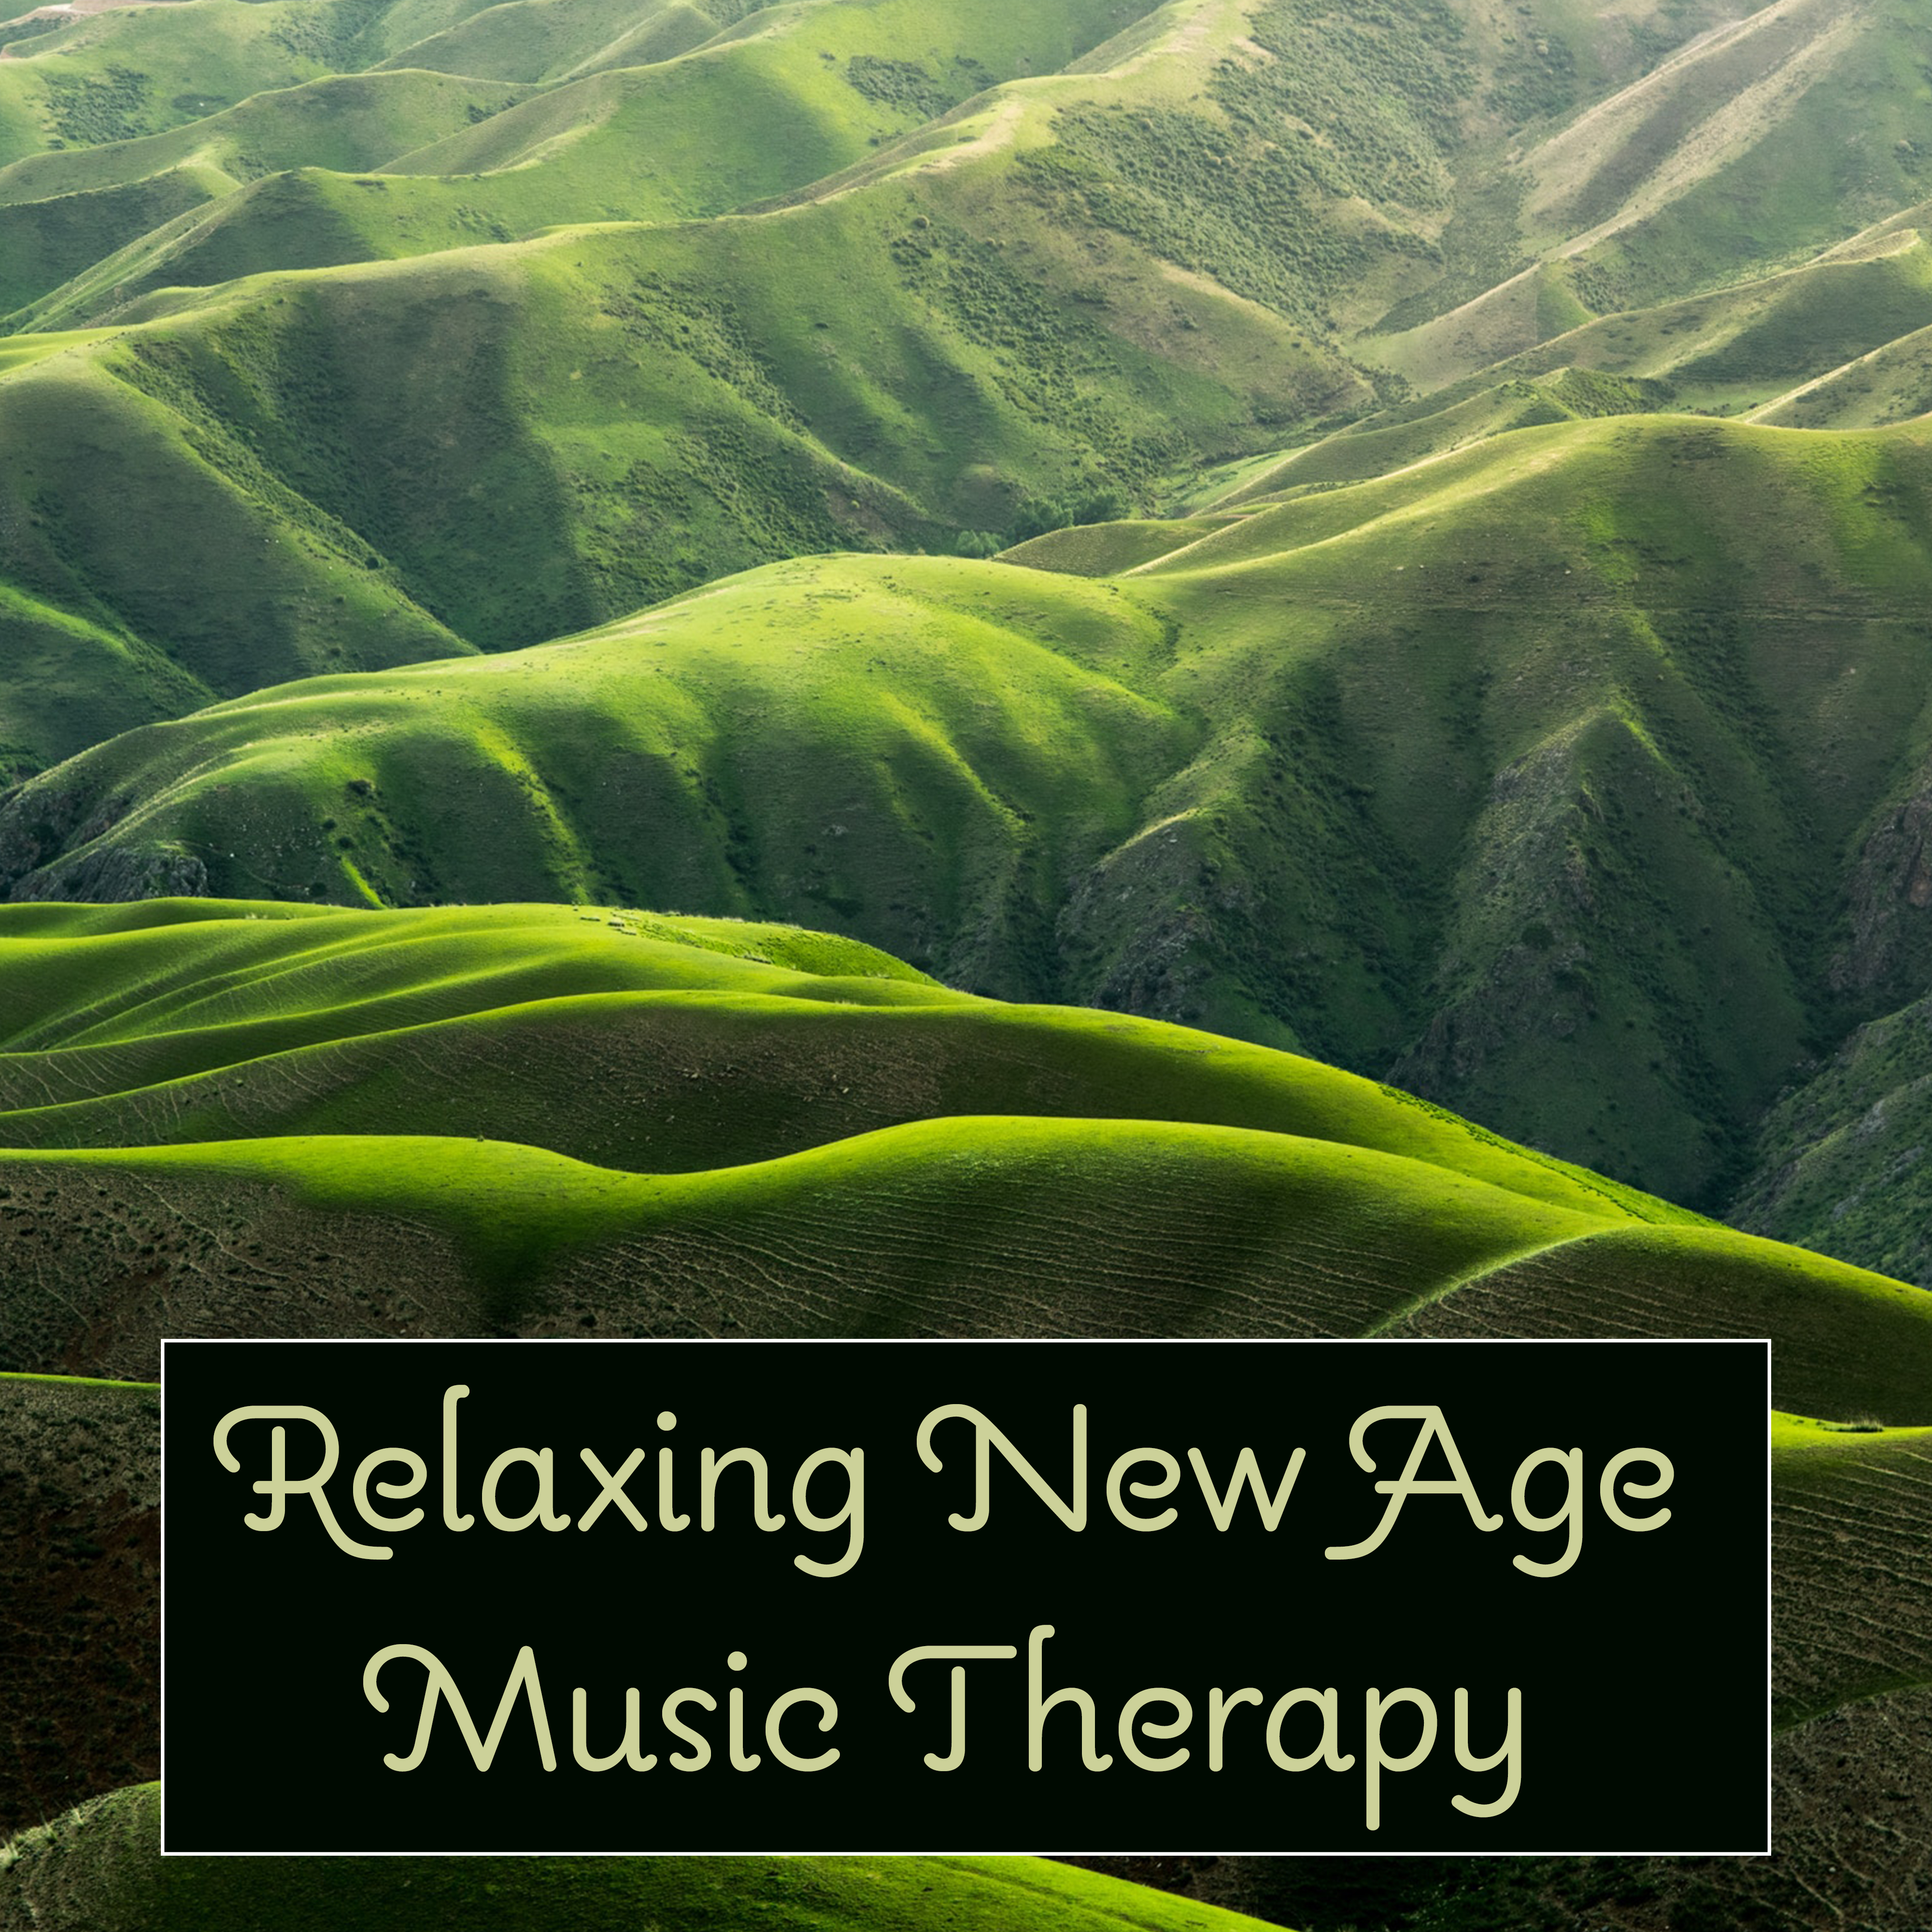 Relaxing New Age Music Therapy